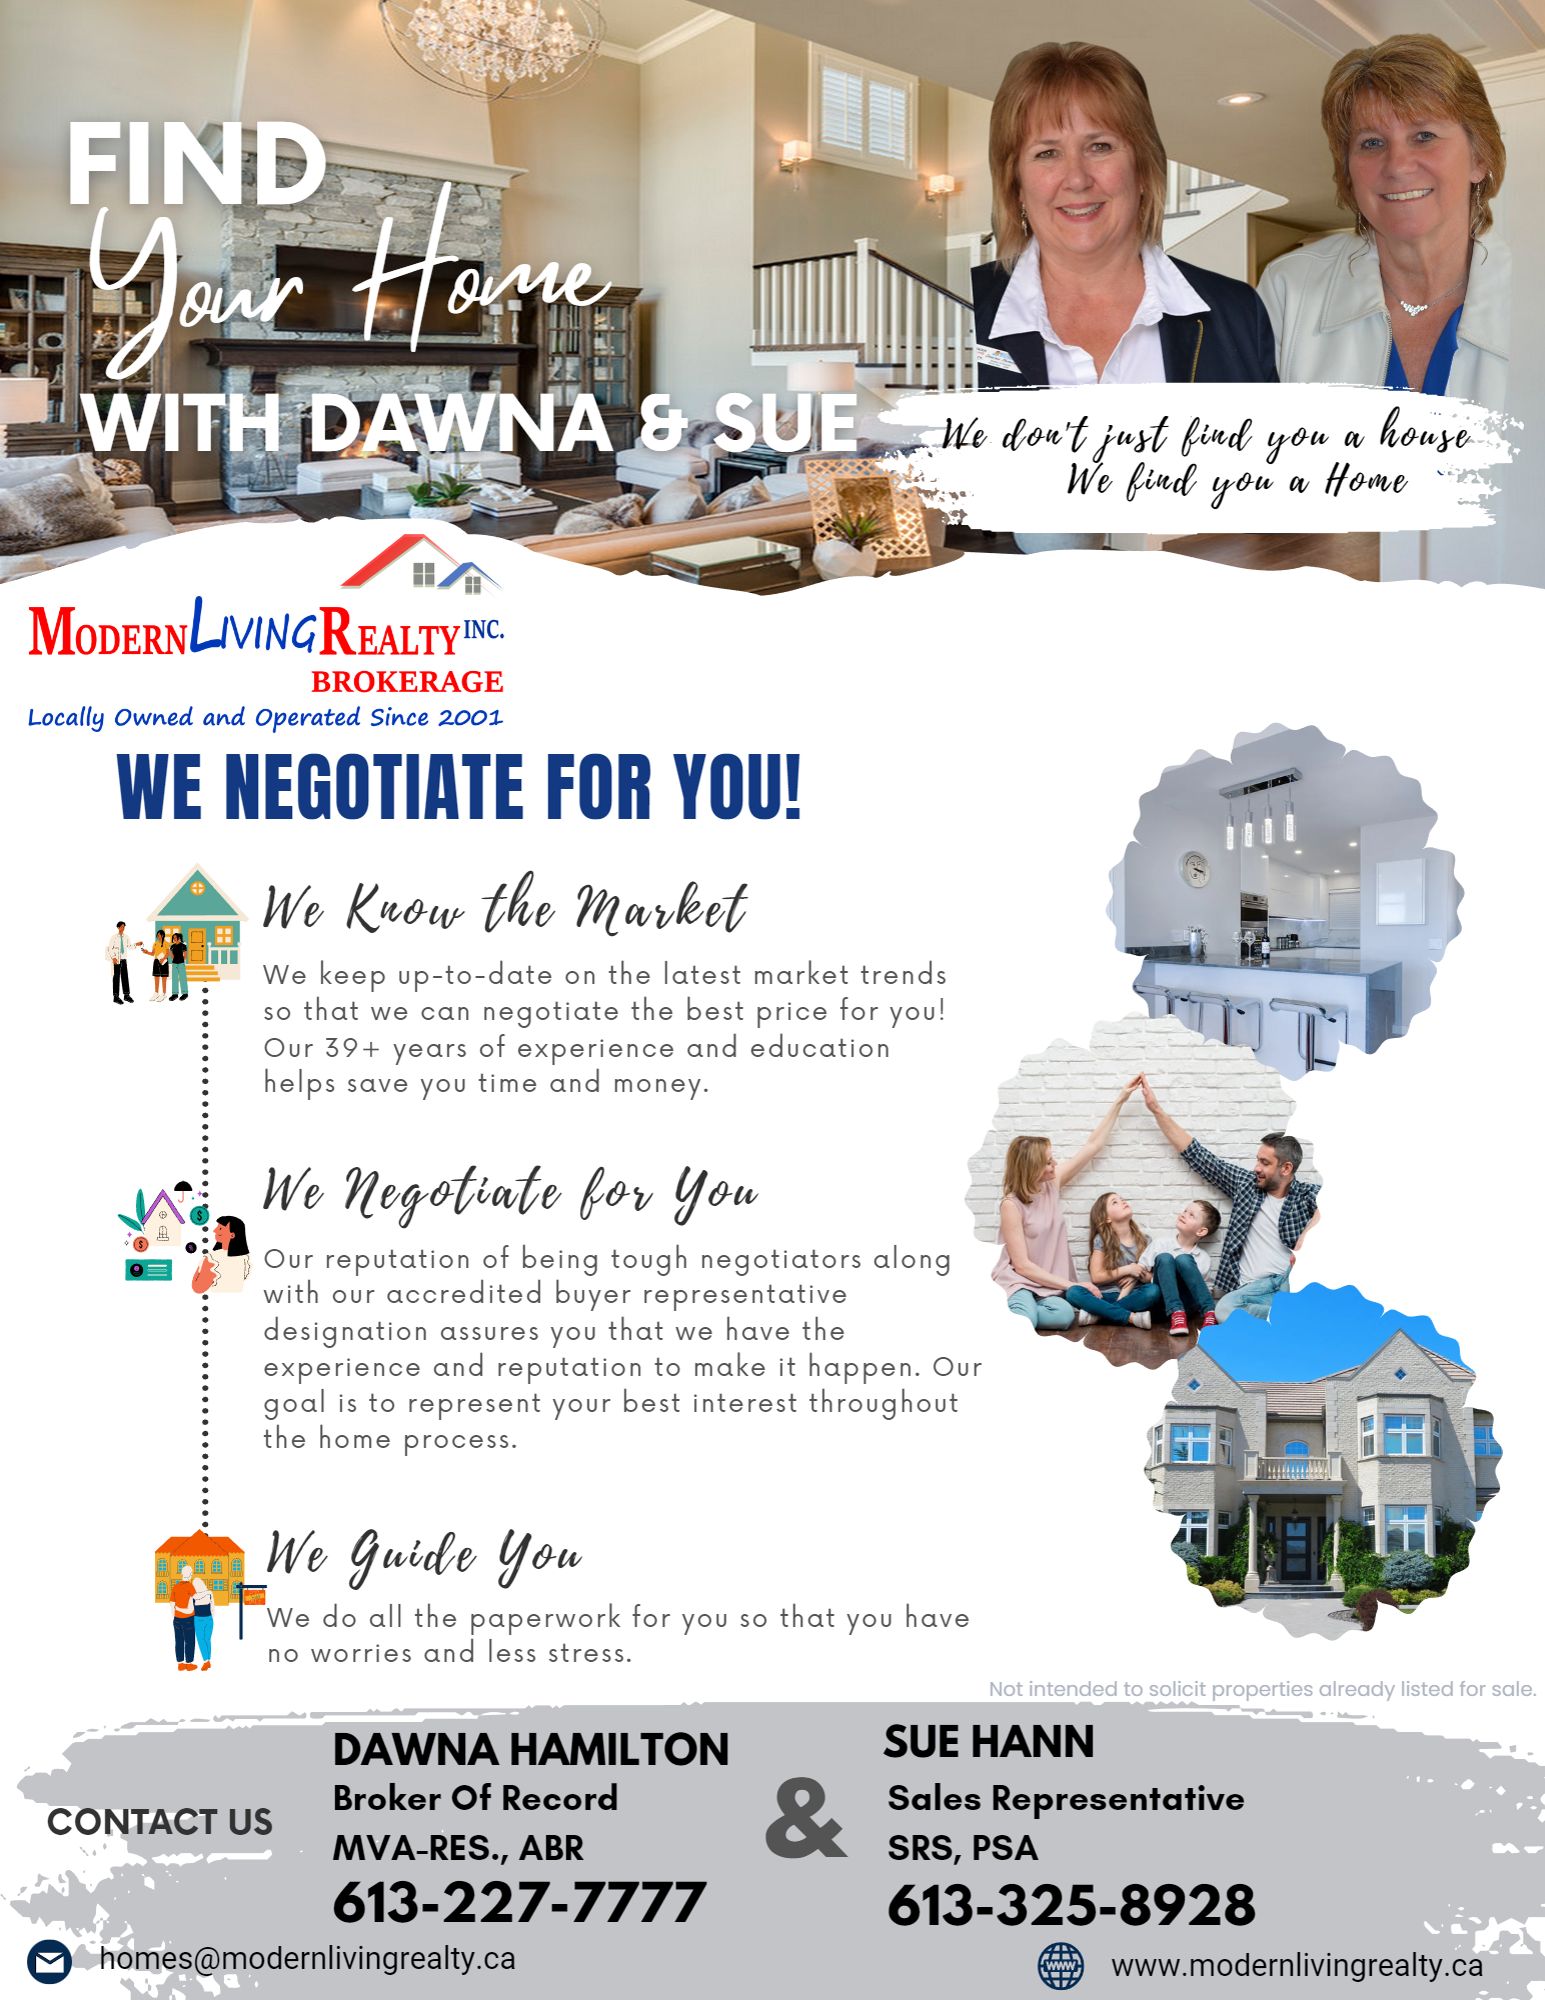 Find Your Home with Dawna & Sue at Modern Living Realty Brokerage